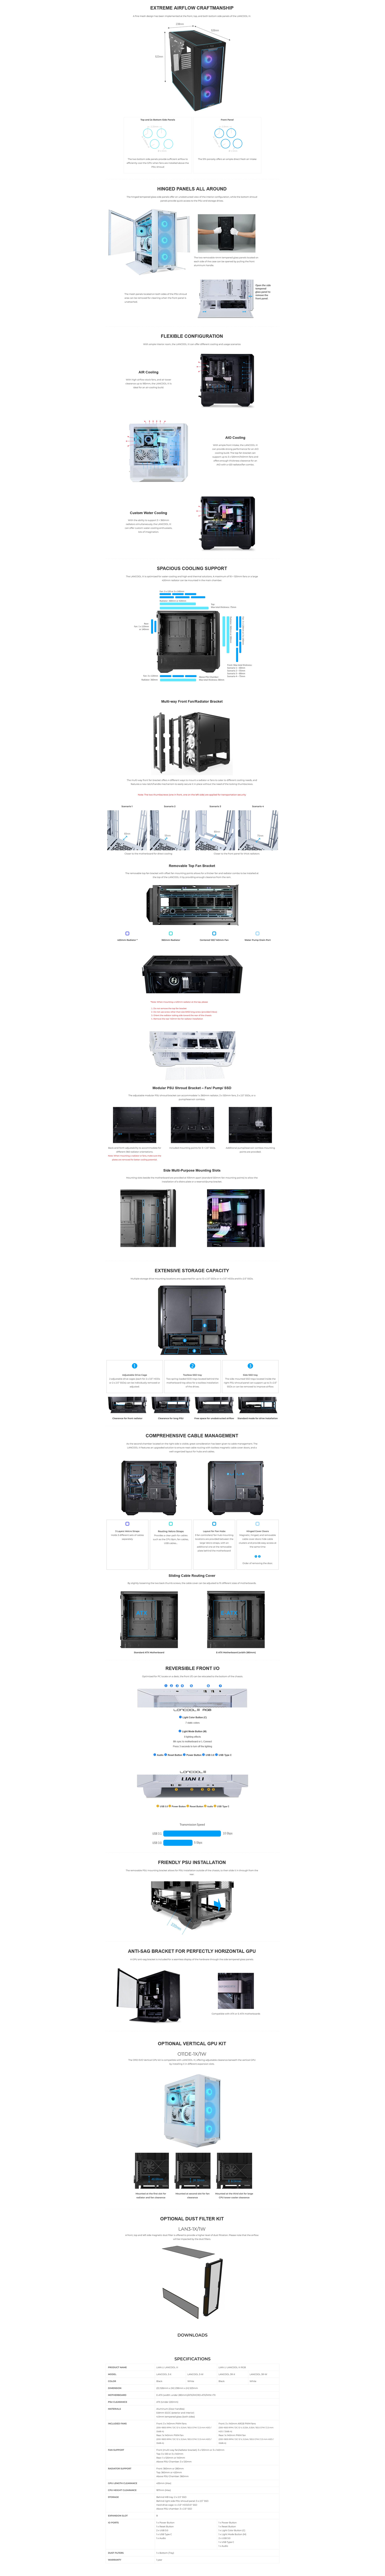 A large marketing image providing additional information about the product Lian Li Lancool III RGB Mid Tower Case - Black - Additional alt info not provided